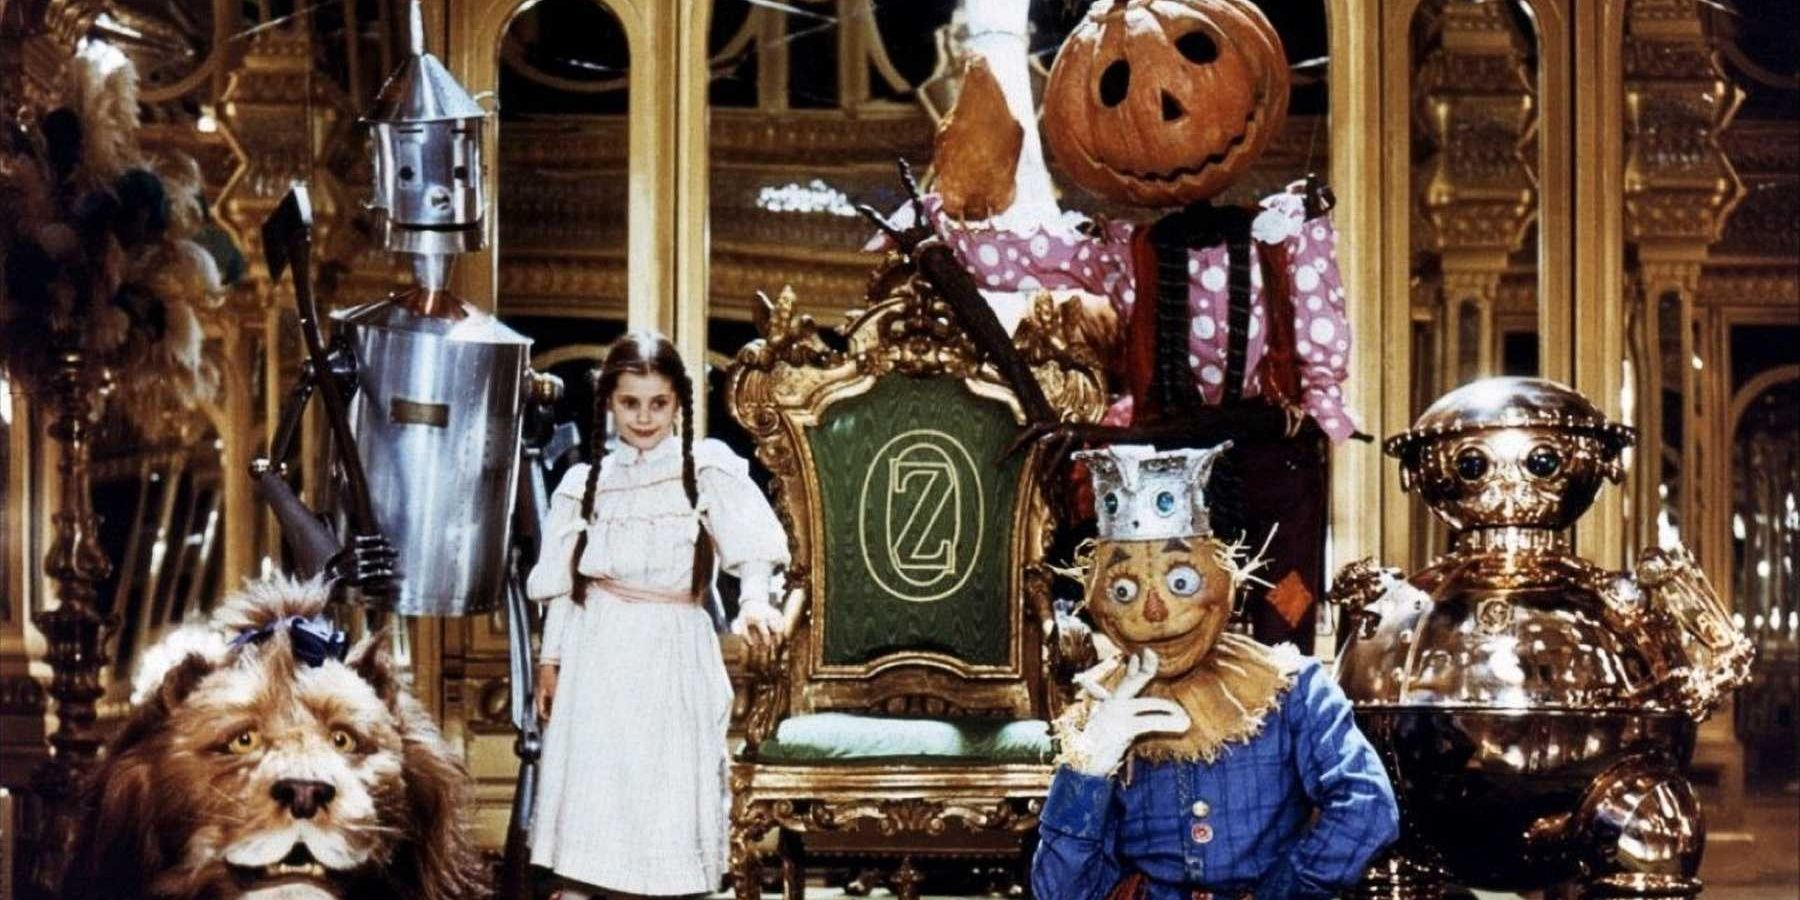 Dorothy and the creatures of Oz in a grand hall in Return to Oz